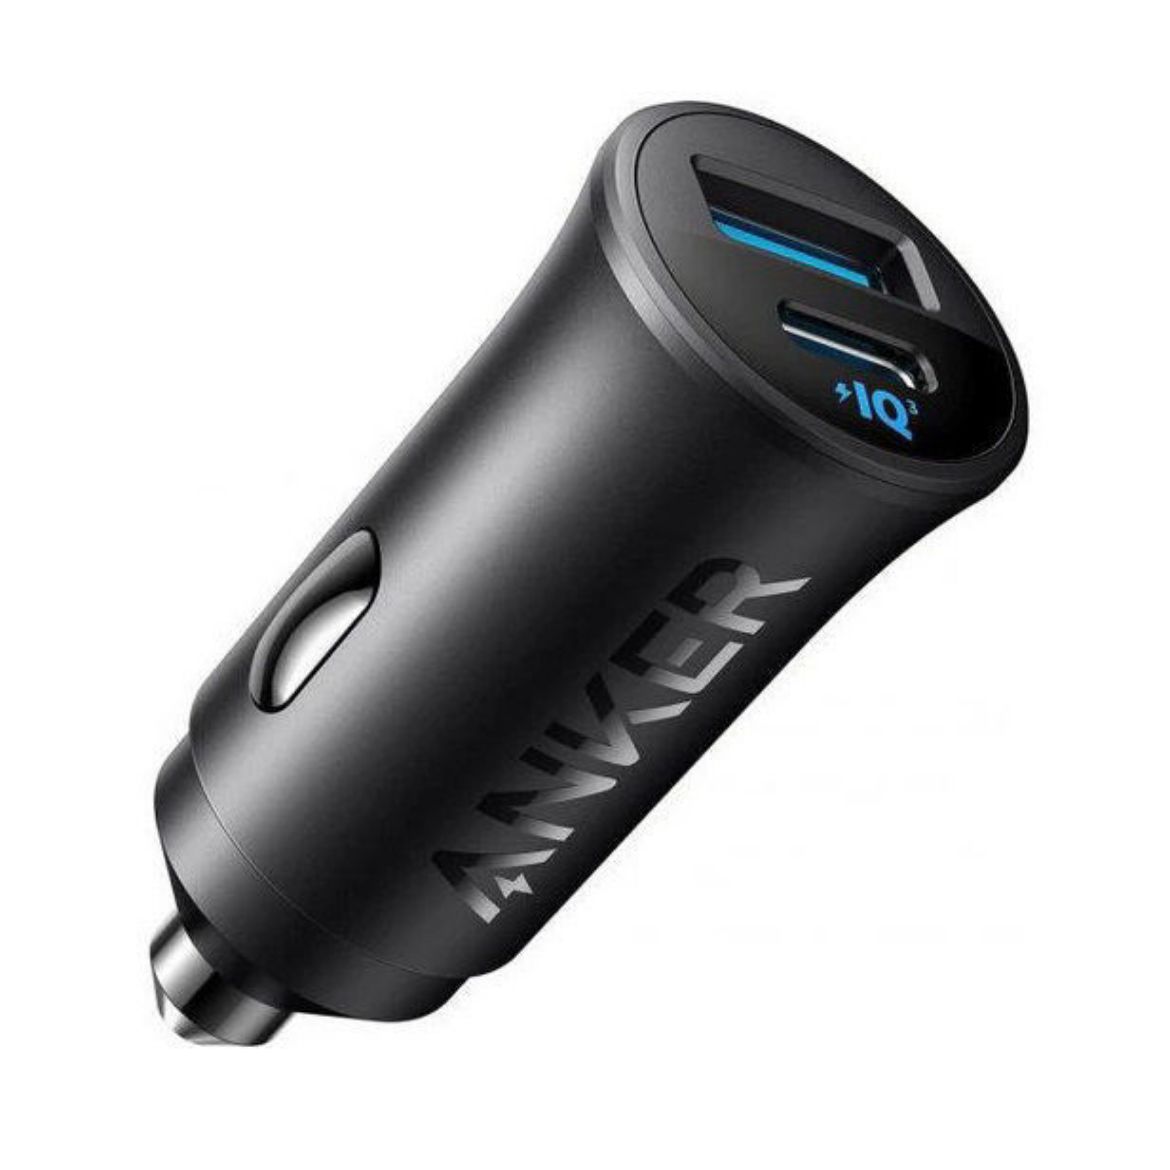 Picture of Anker Car Charger 30W 2 Ports - Black